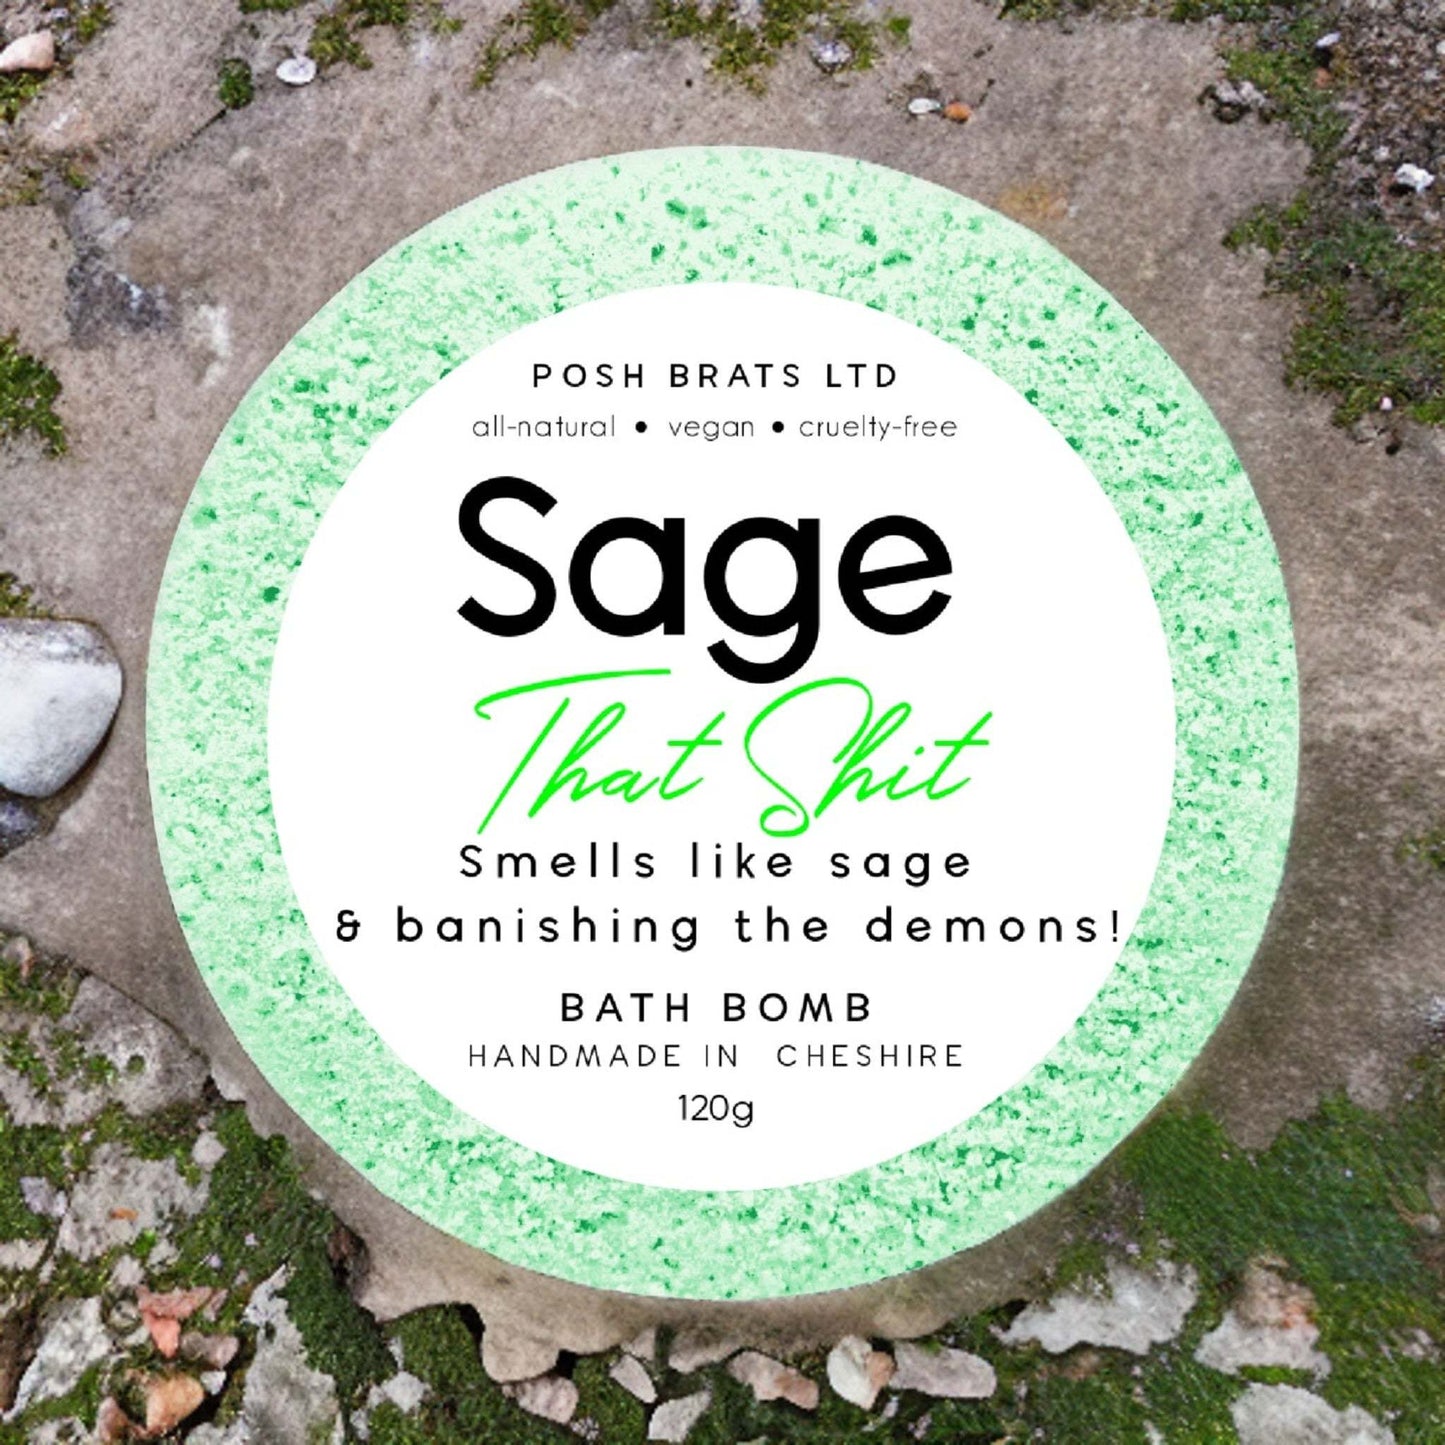 Purify and refresh with Sage That Shit! Our fizzy bath bomb infuses your soak with the herbal goodness of sage for total relaxation.